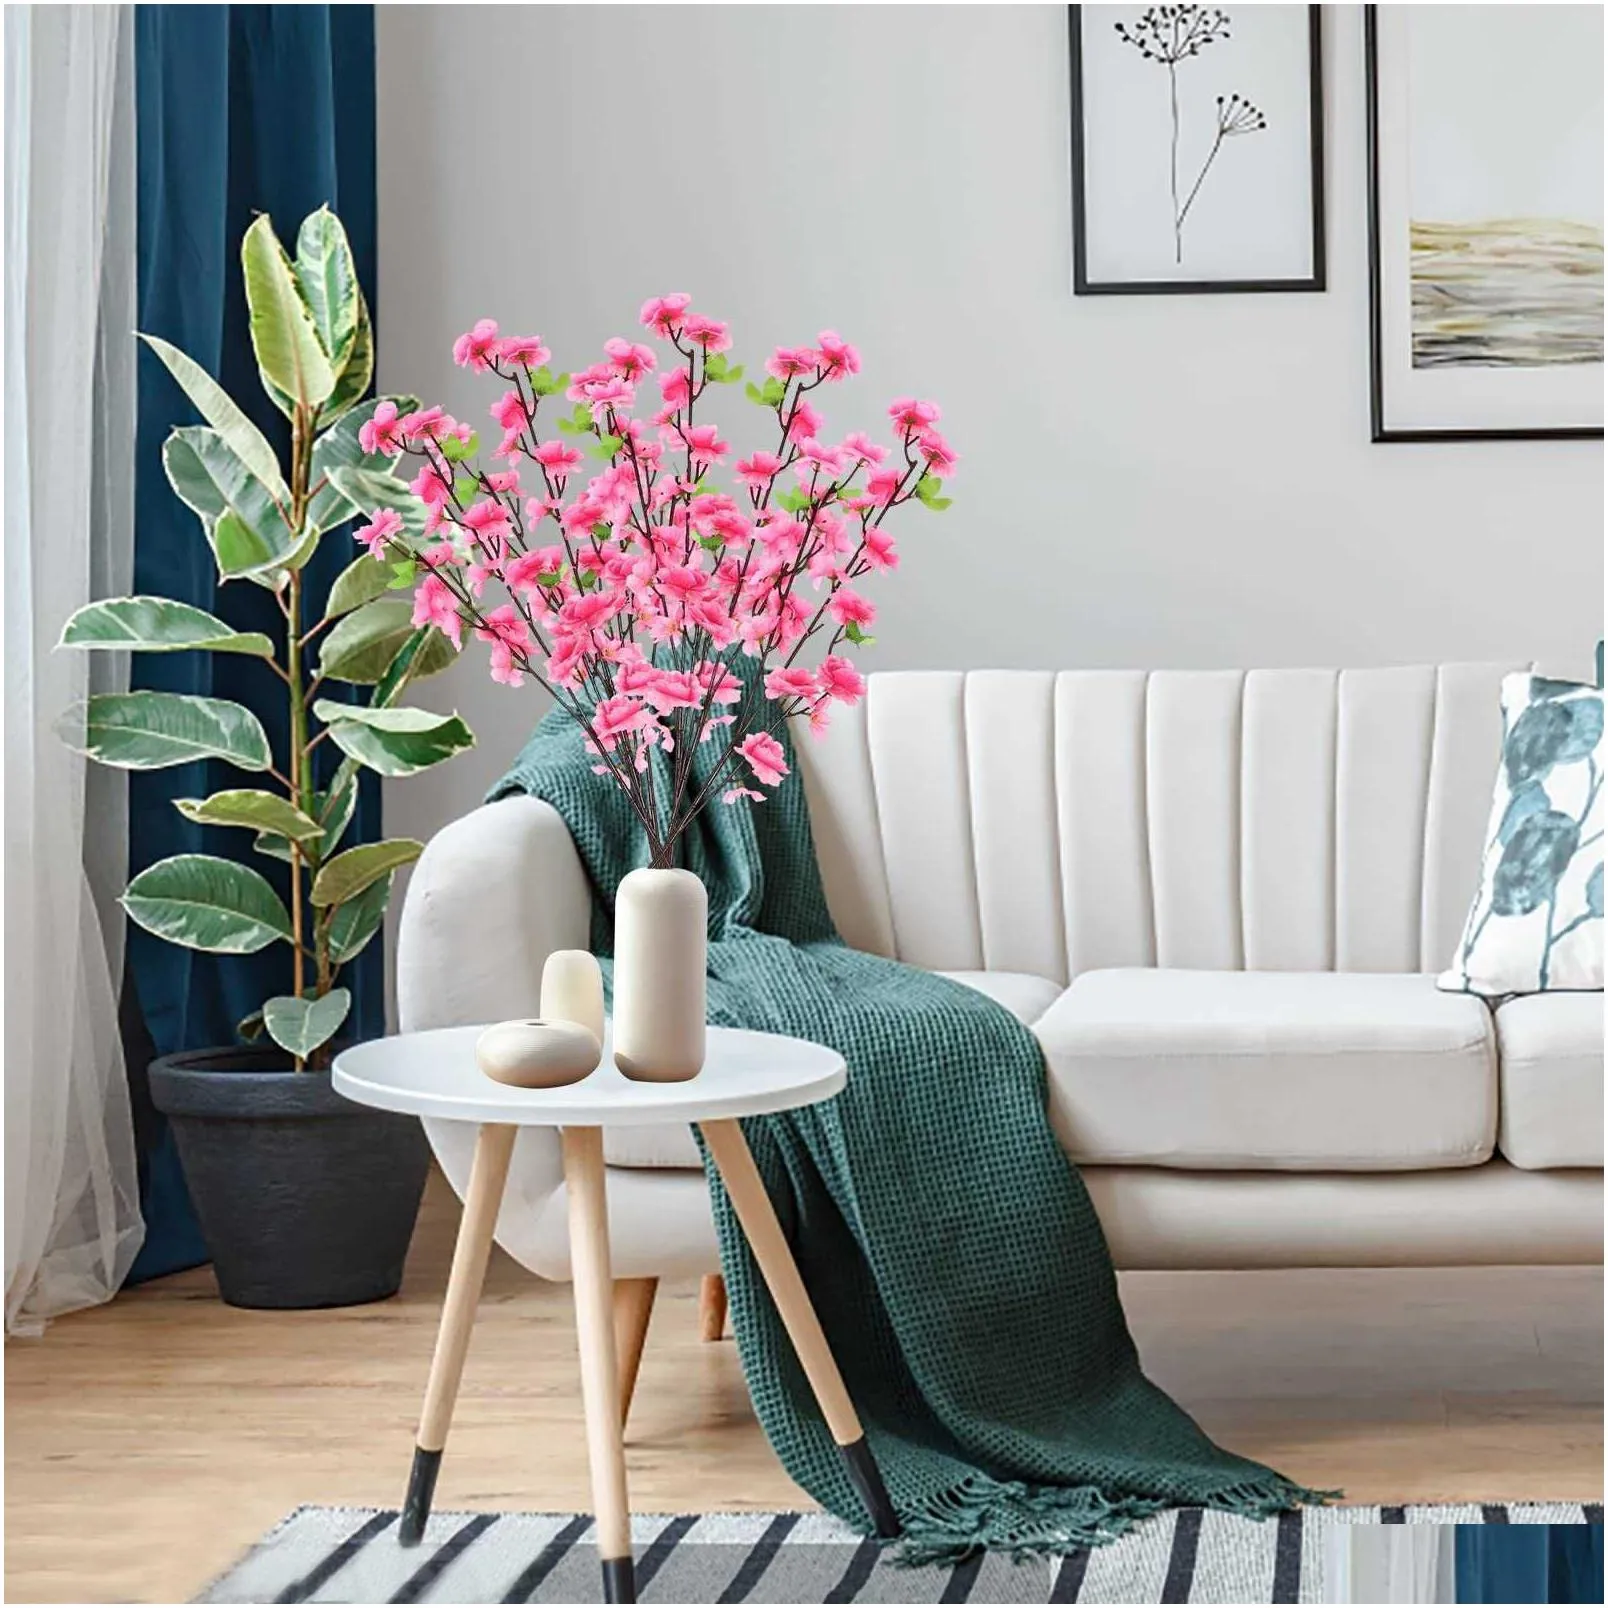 Artificial Faux Cherry Blossom Cherry Blossom Flower Branches For Wedding  And Home Decor Silk Spring Peach Bouquet With Fake Stems DHLkt From  Stamp2022, $3.56